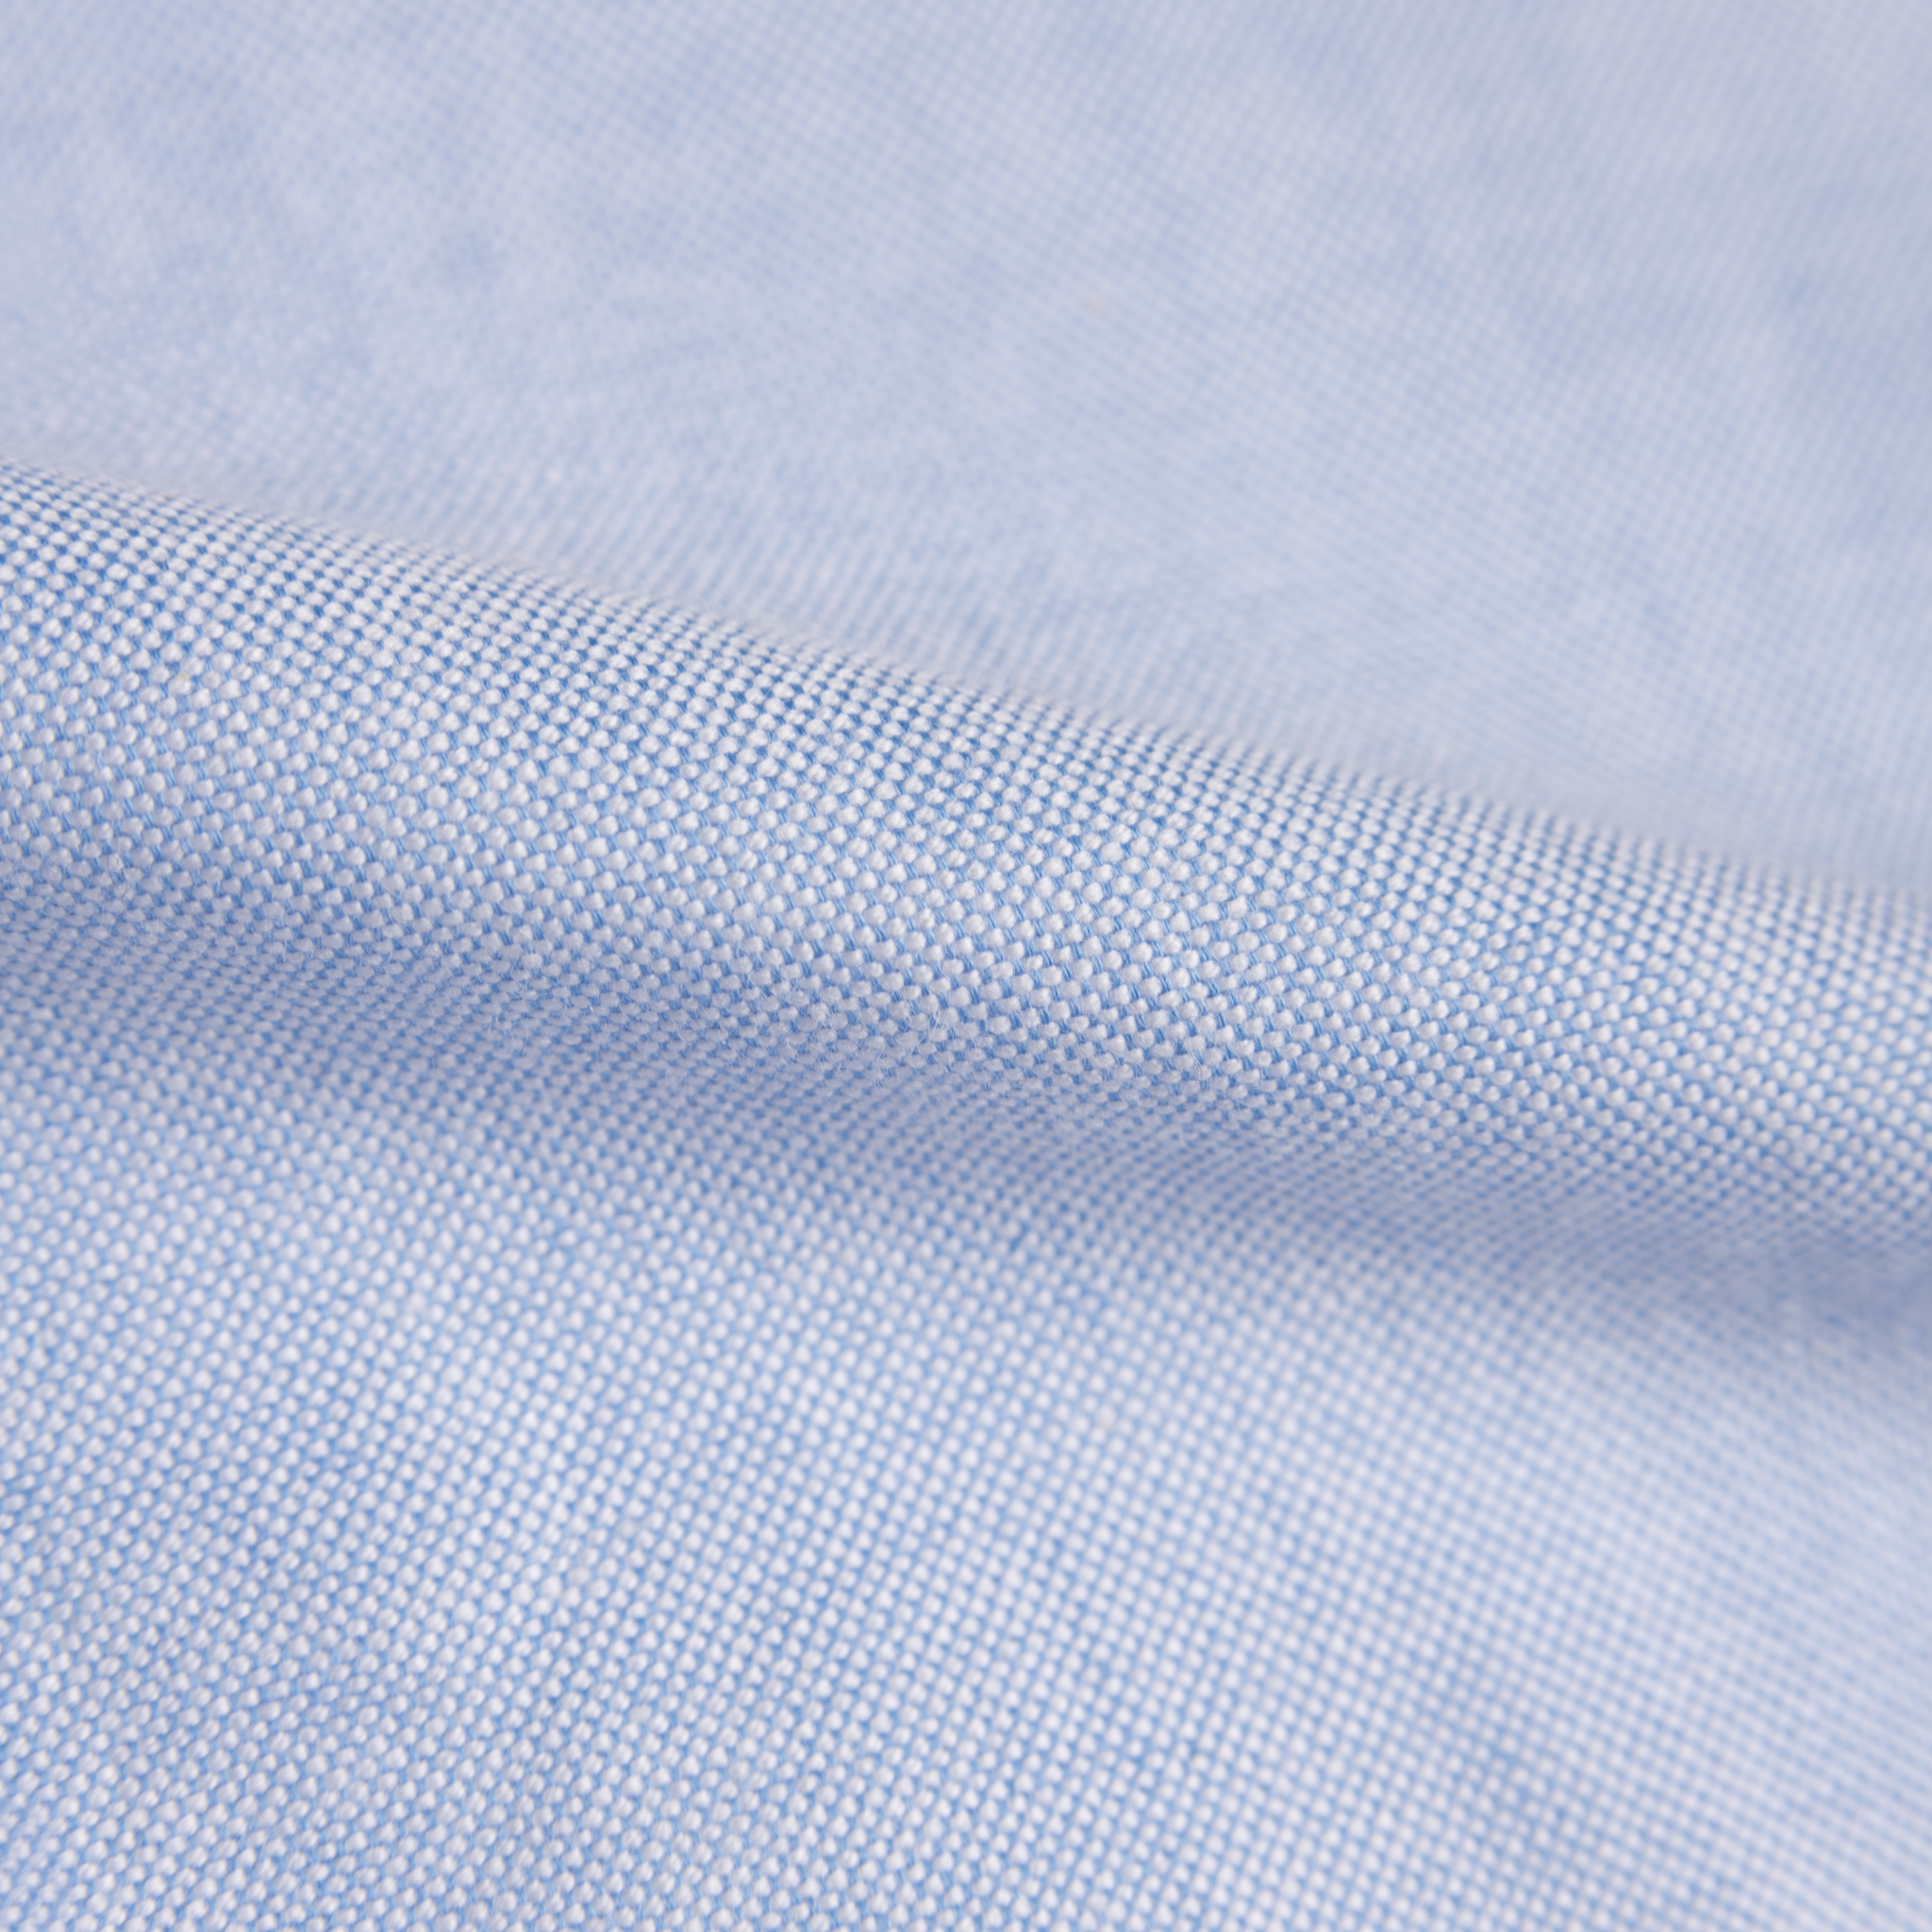  Easy Shirt - Cotton Oxford - Pale Blue - fabric 